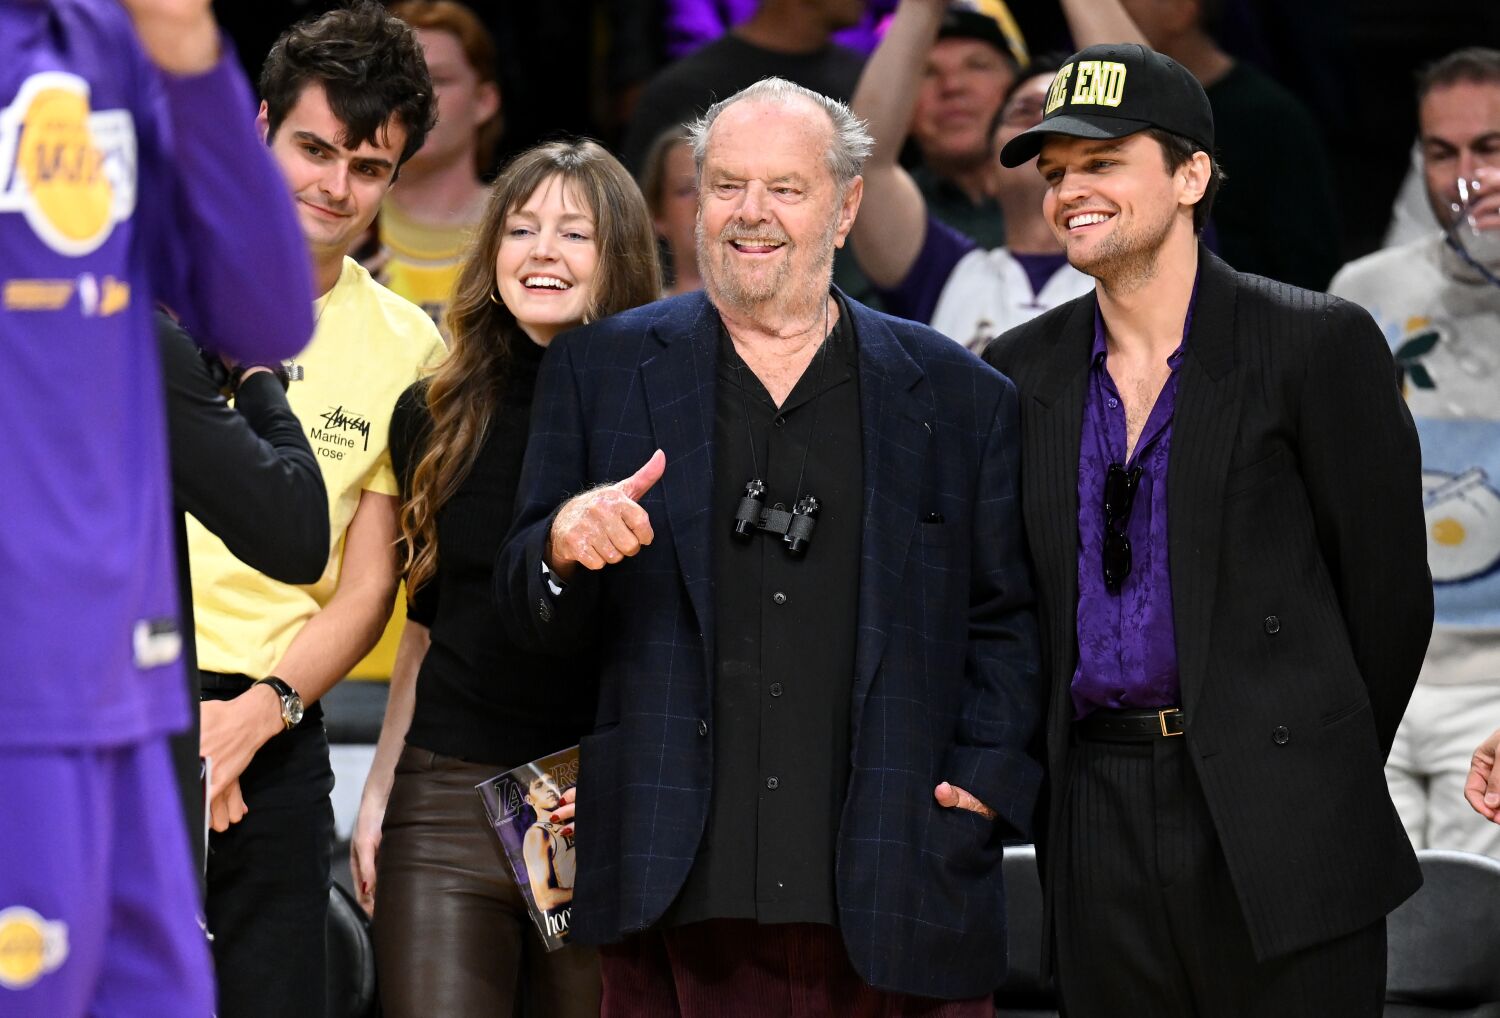 Jack Nicholson returns courtside to cheer beloved Lakers to playoff win